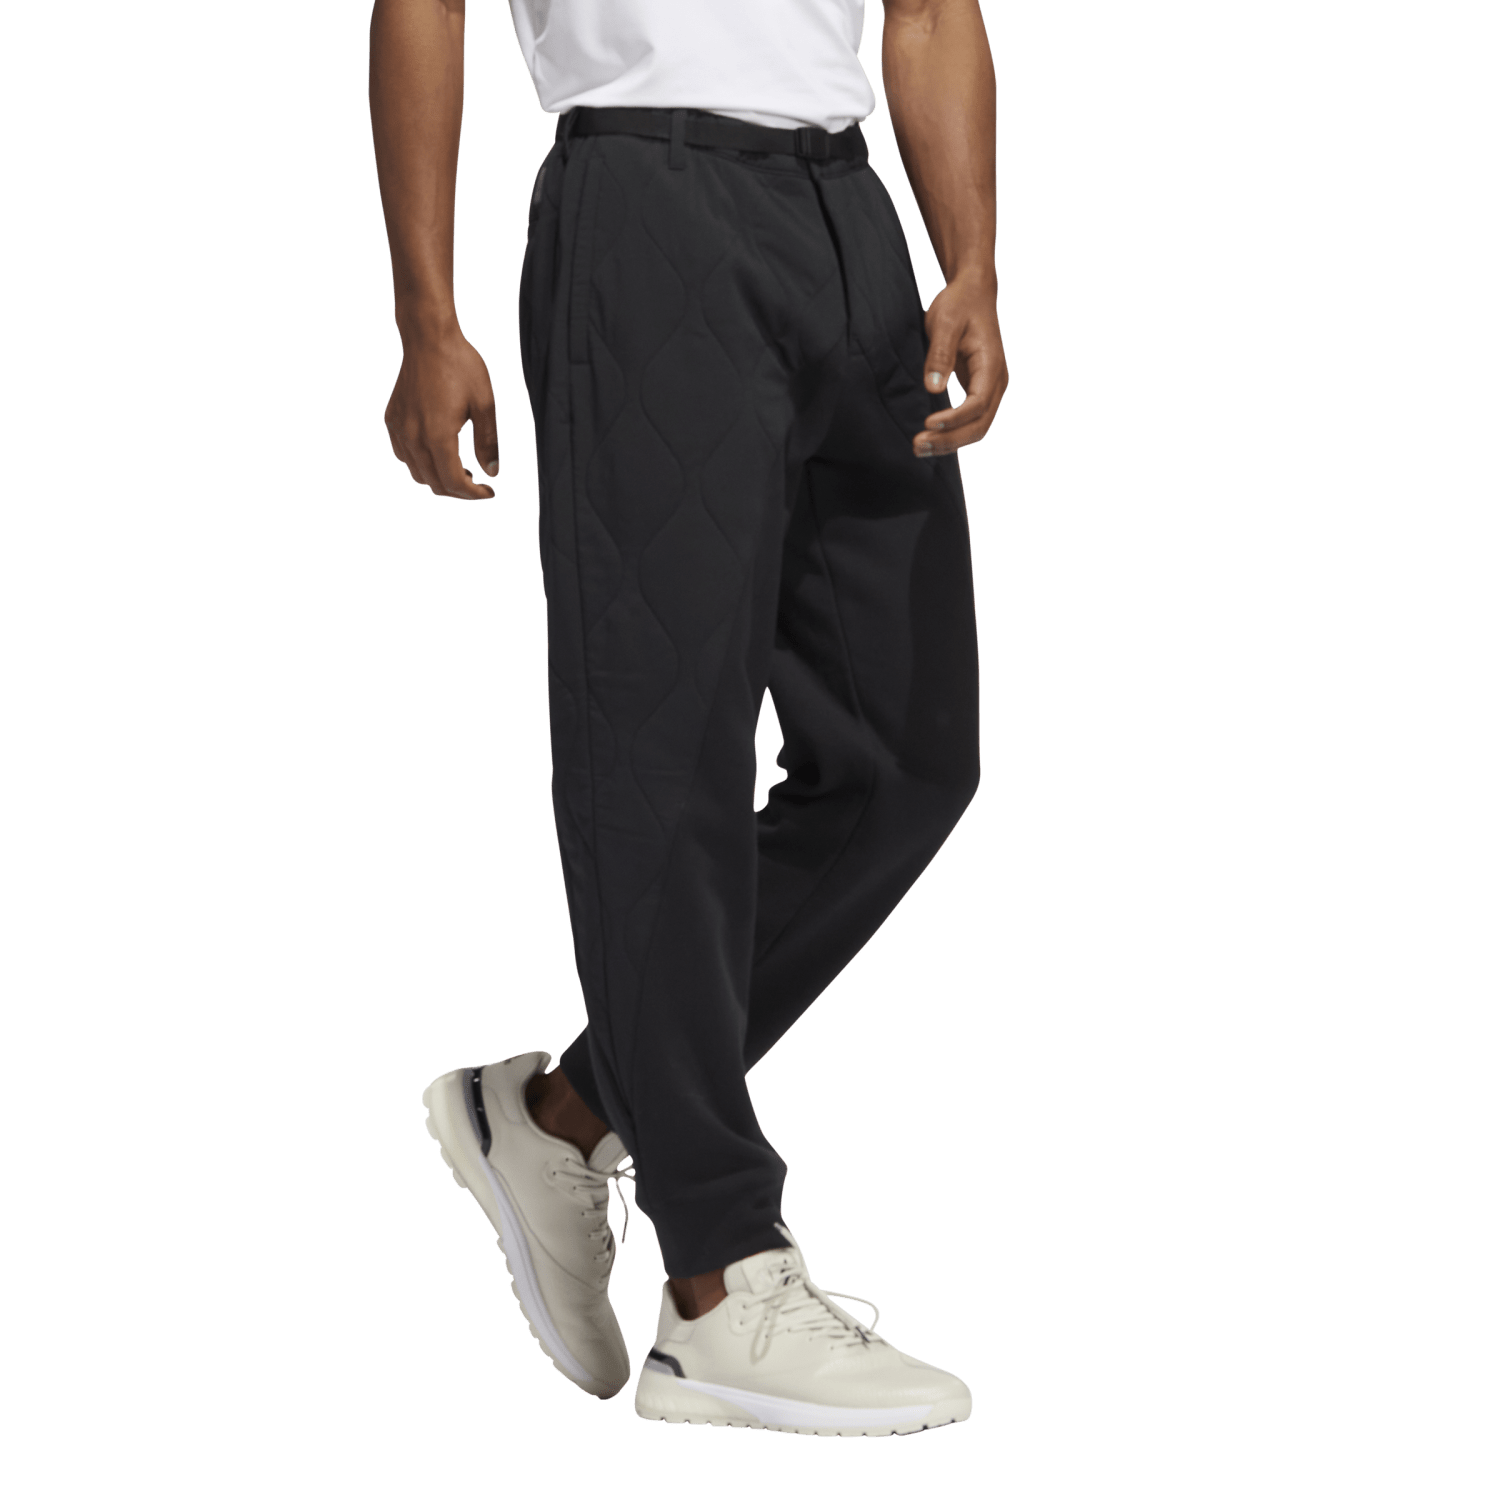 Adicross Quilted Golf Jogger Pants, Black